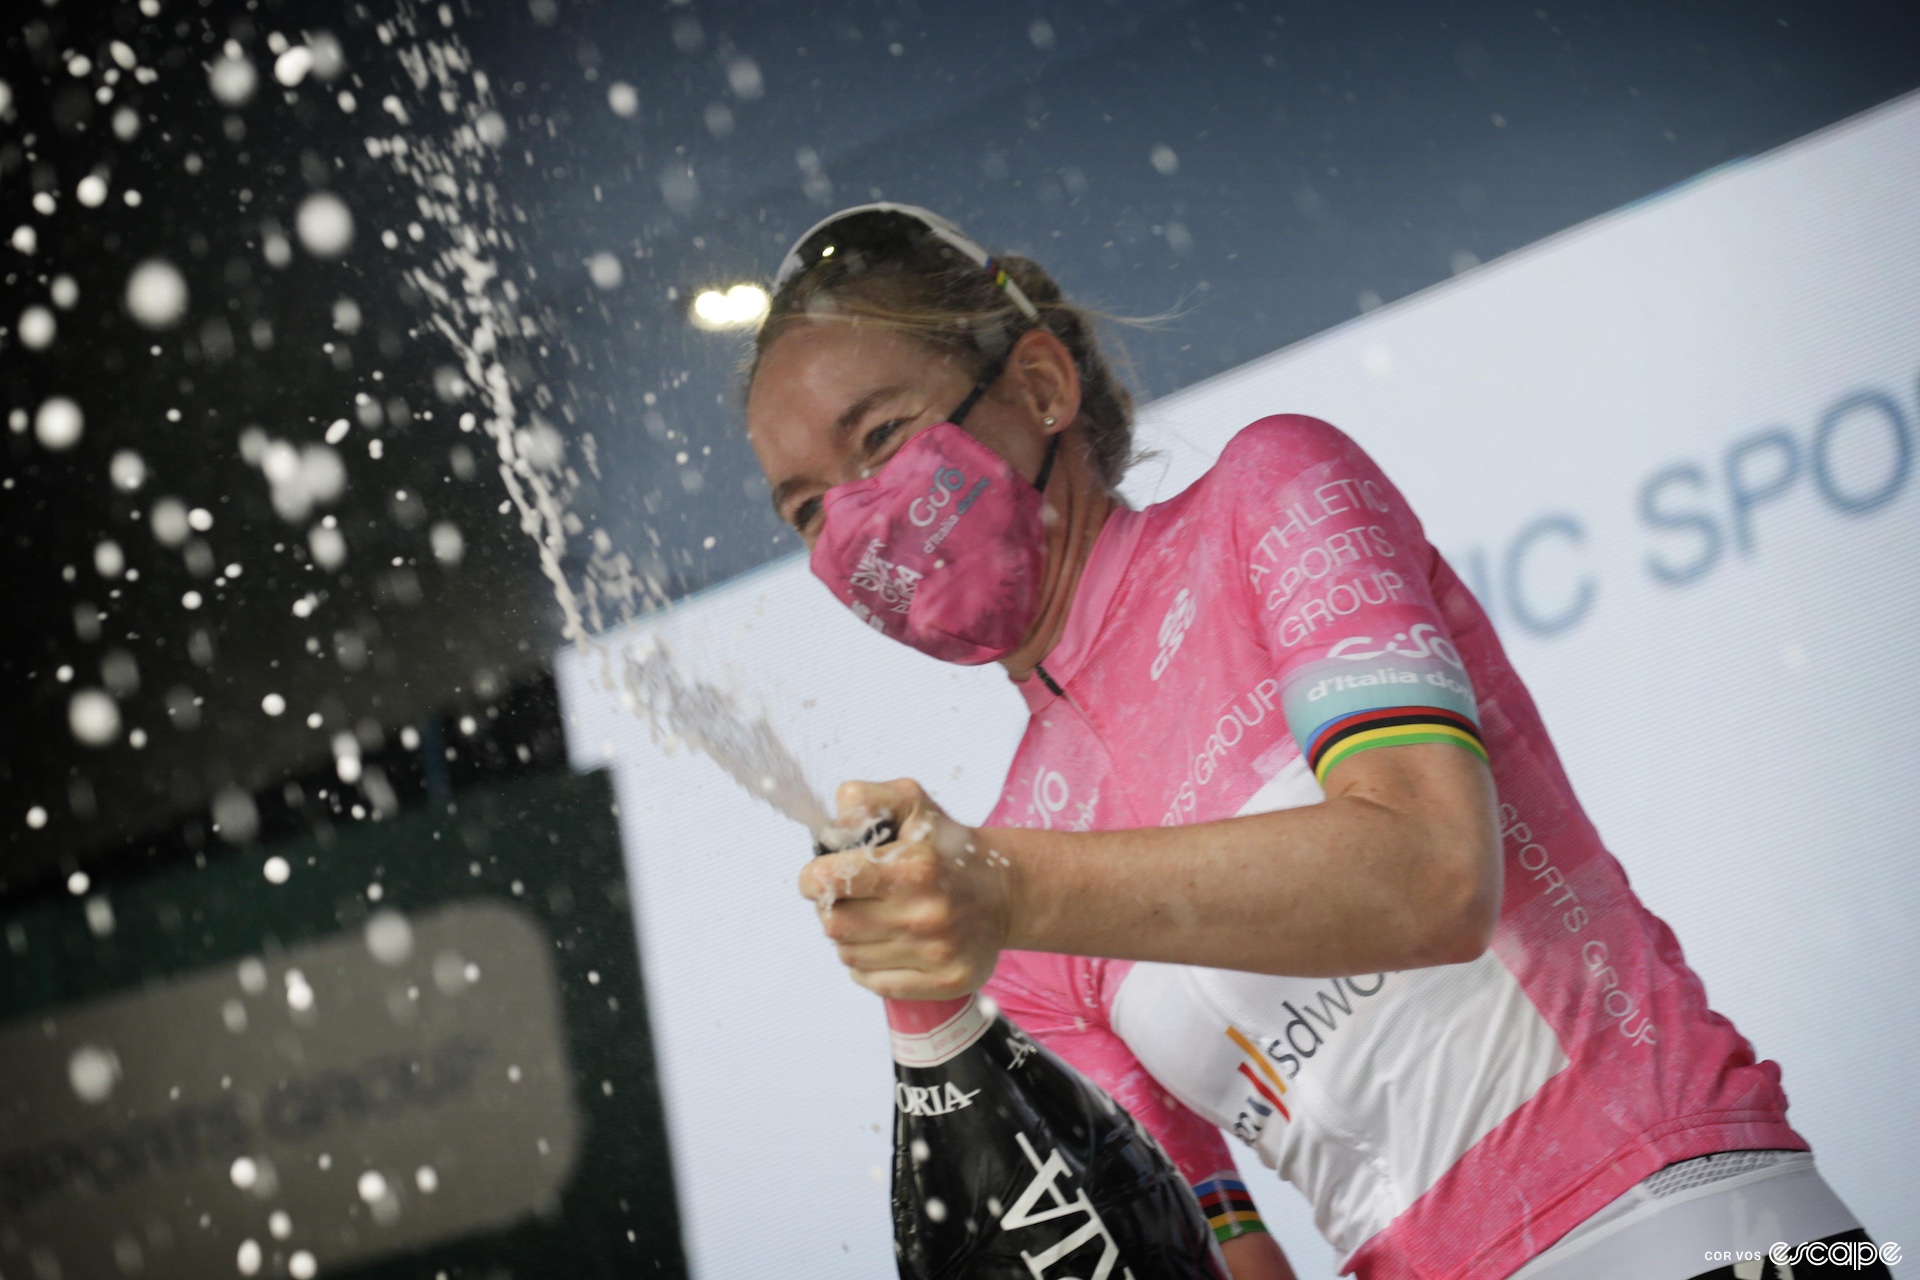 Van der Breggen sprays champagne while wearing the pink leader's jersey of the Giro Donne